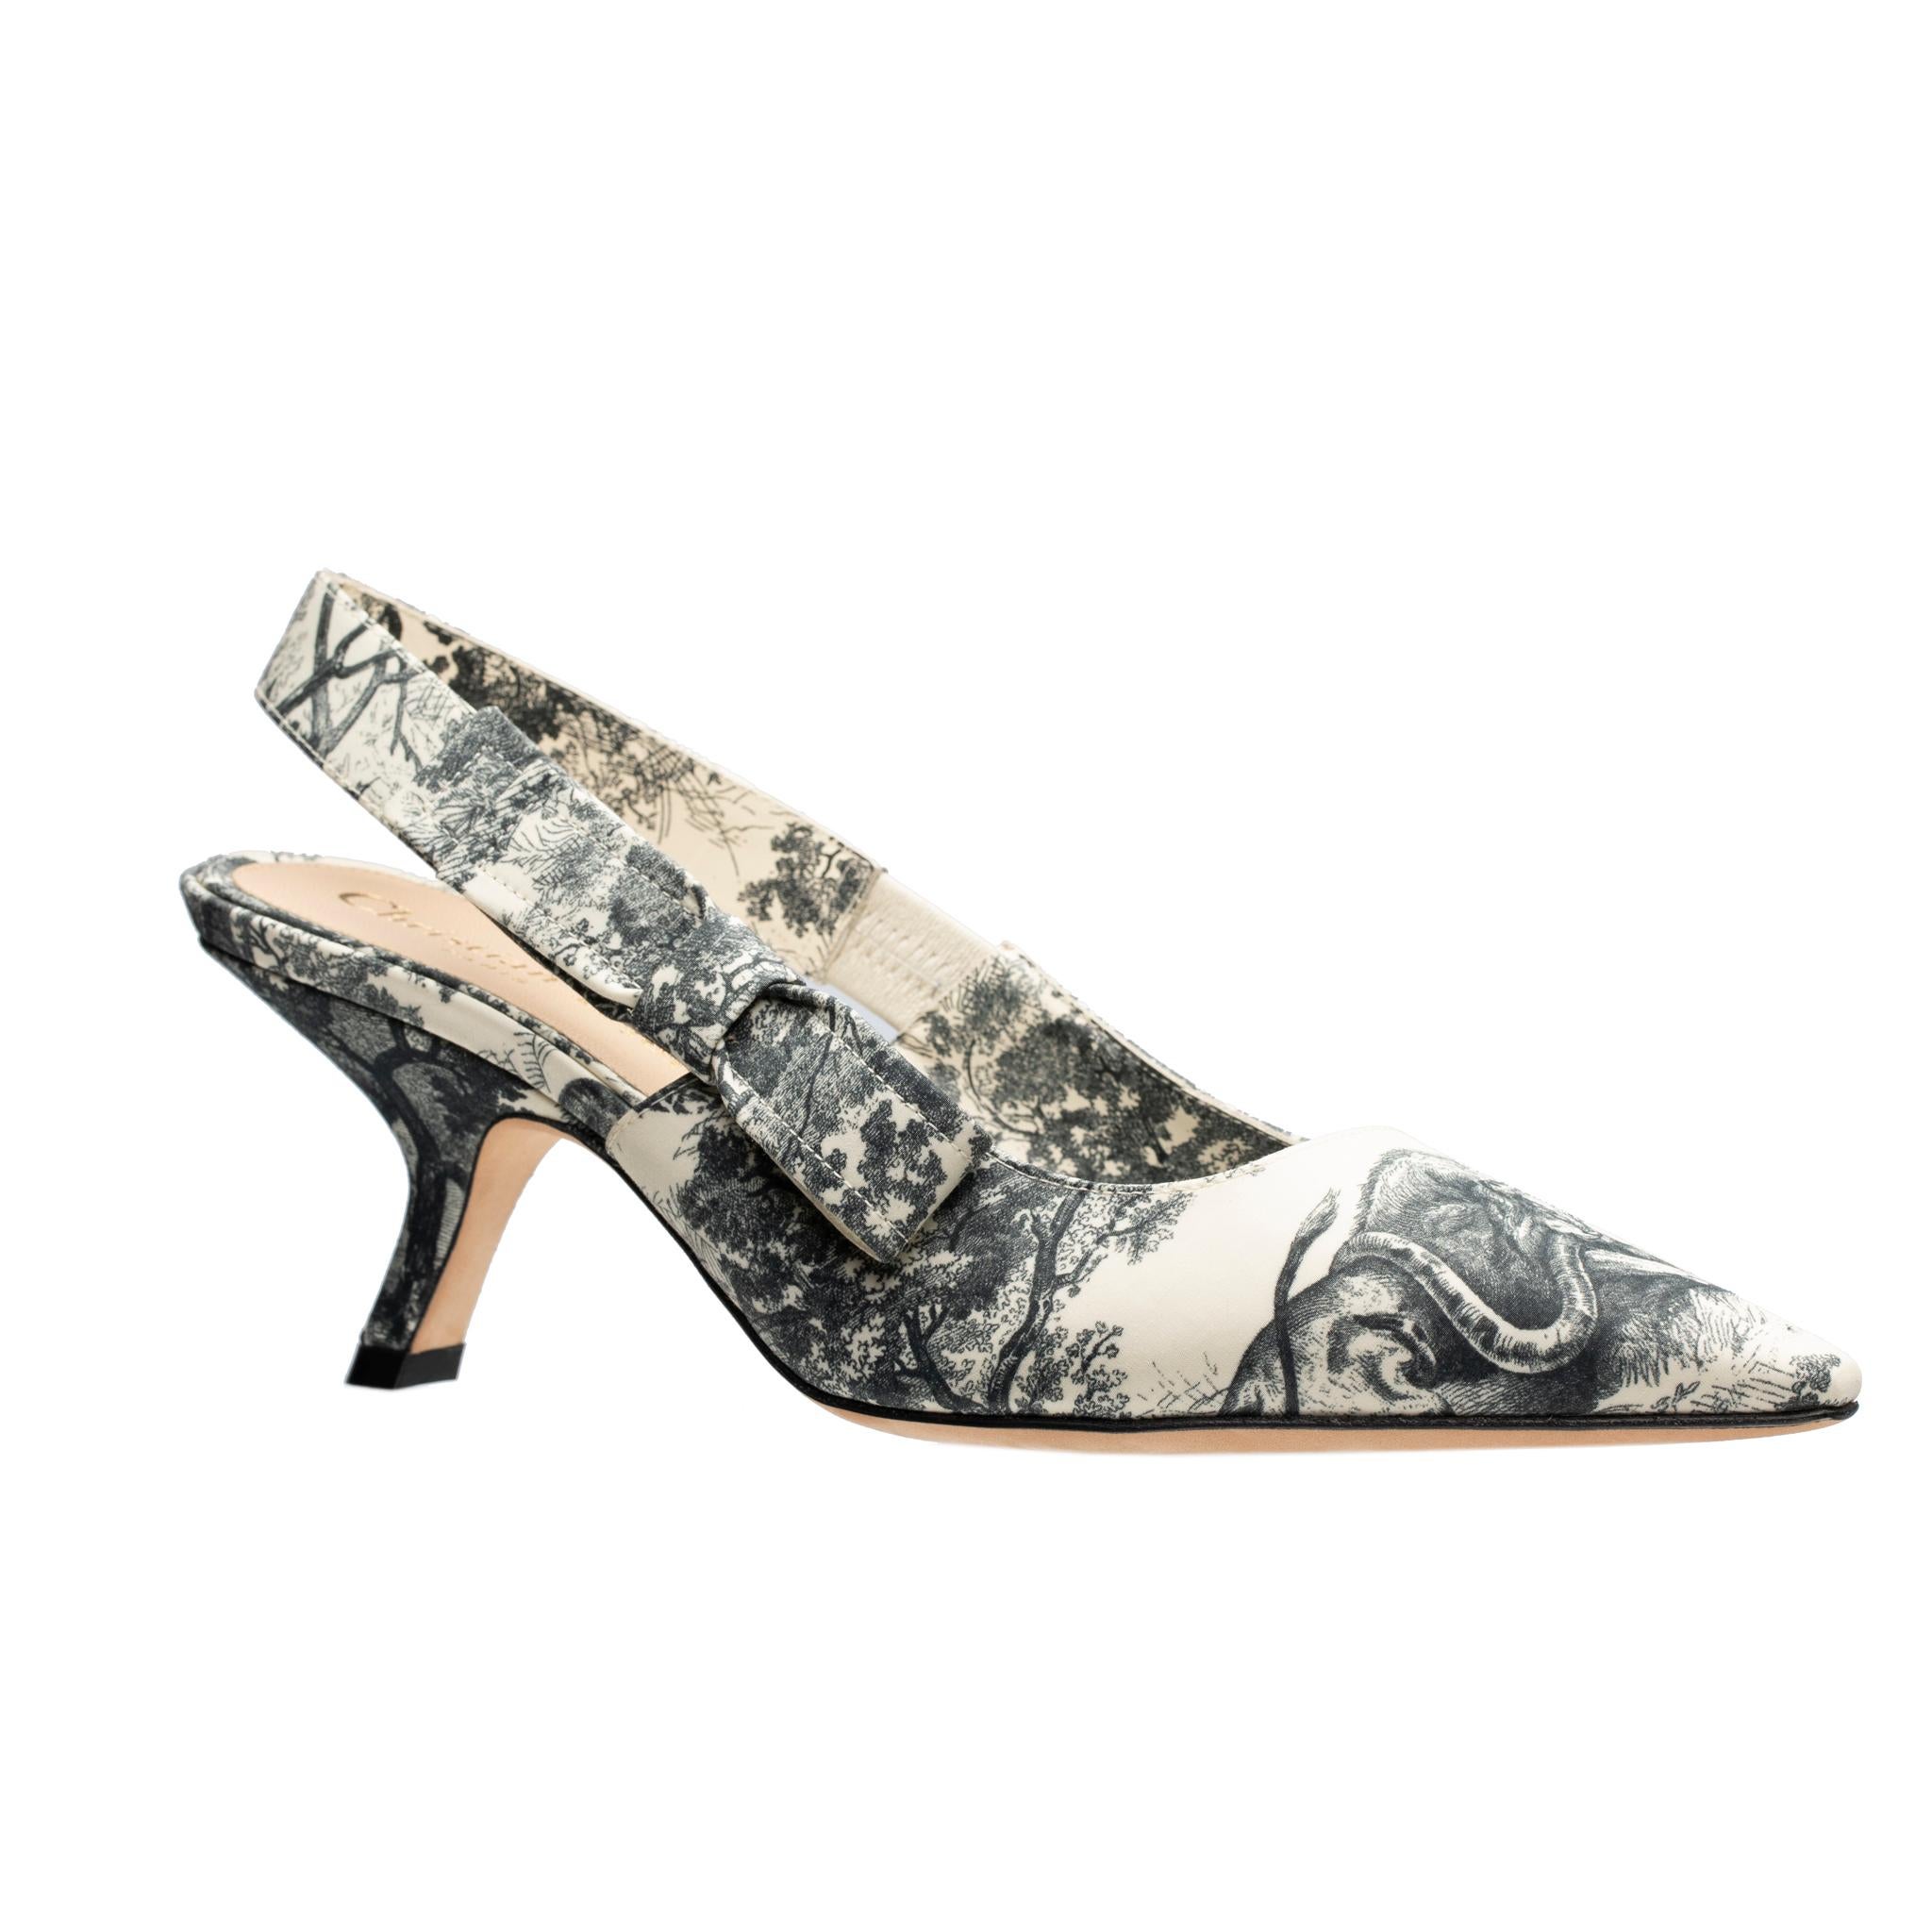 Christian Dior De Jouy J'adior Slingback Kitten Heel

Brand:

Christian Dior

Product:

De Jouy J'adior Slingback Kitten Heel

Size:

36 Fr

Colour:

Blue & Ecru

Heel:

7.5 Cm

Material:

Smooth Leather & Toile Canvas

Condition:

Pristine; New Or